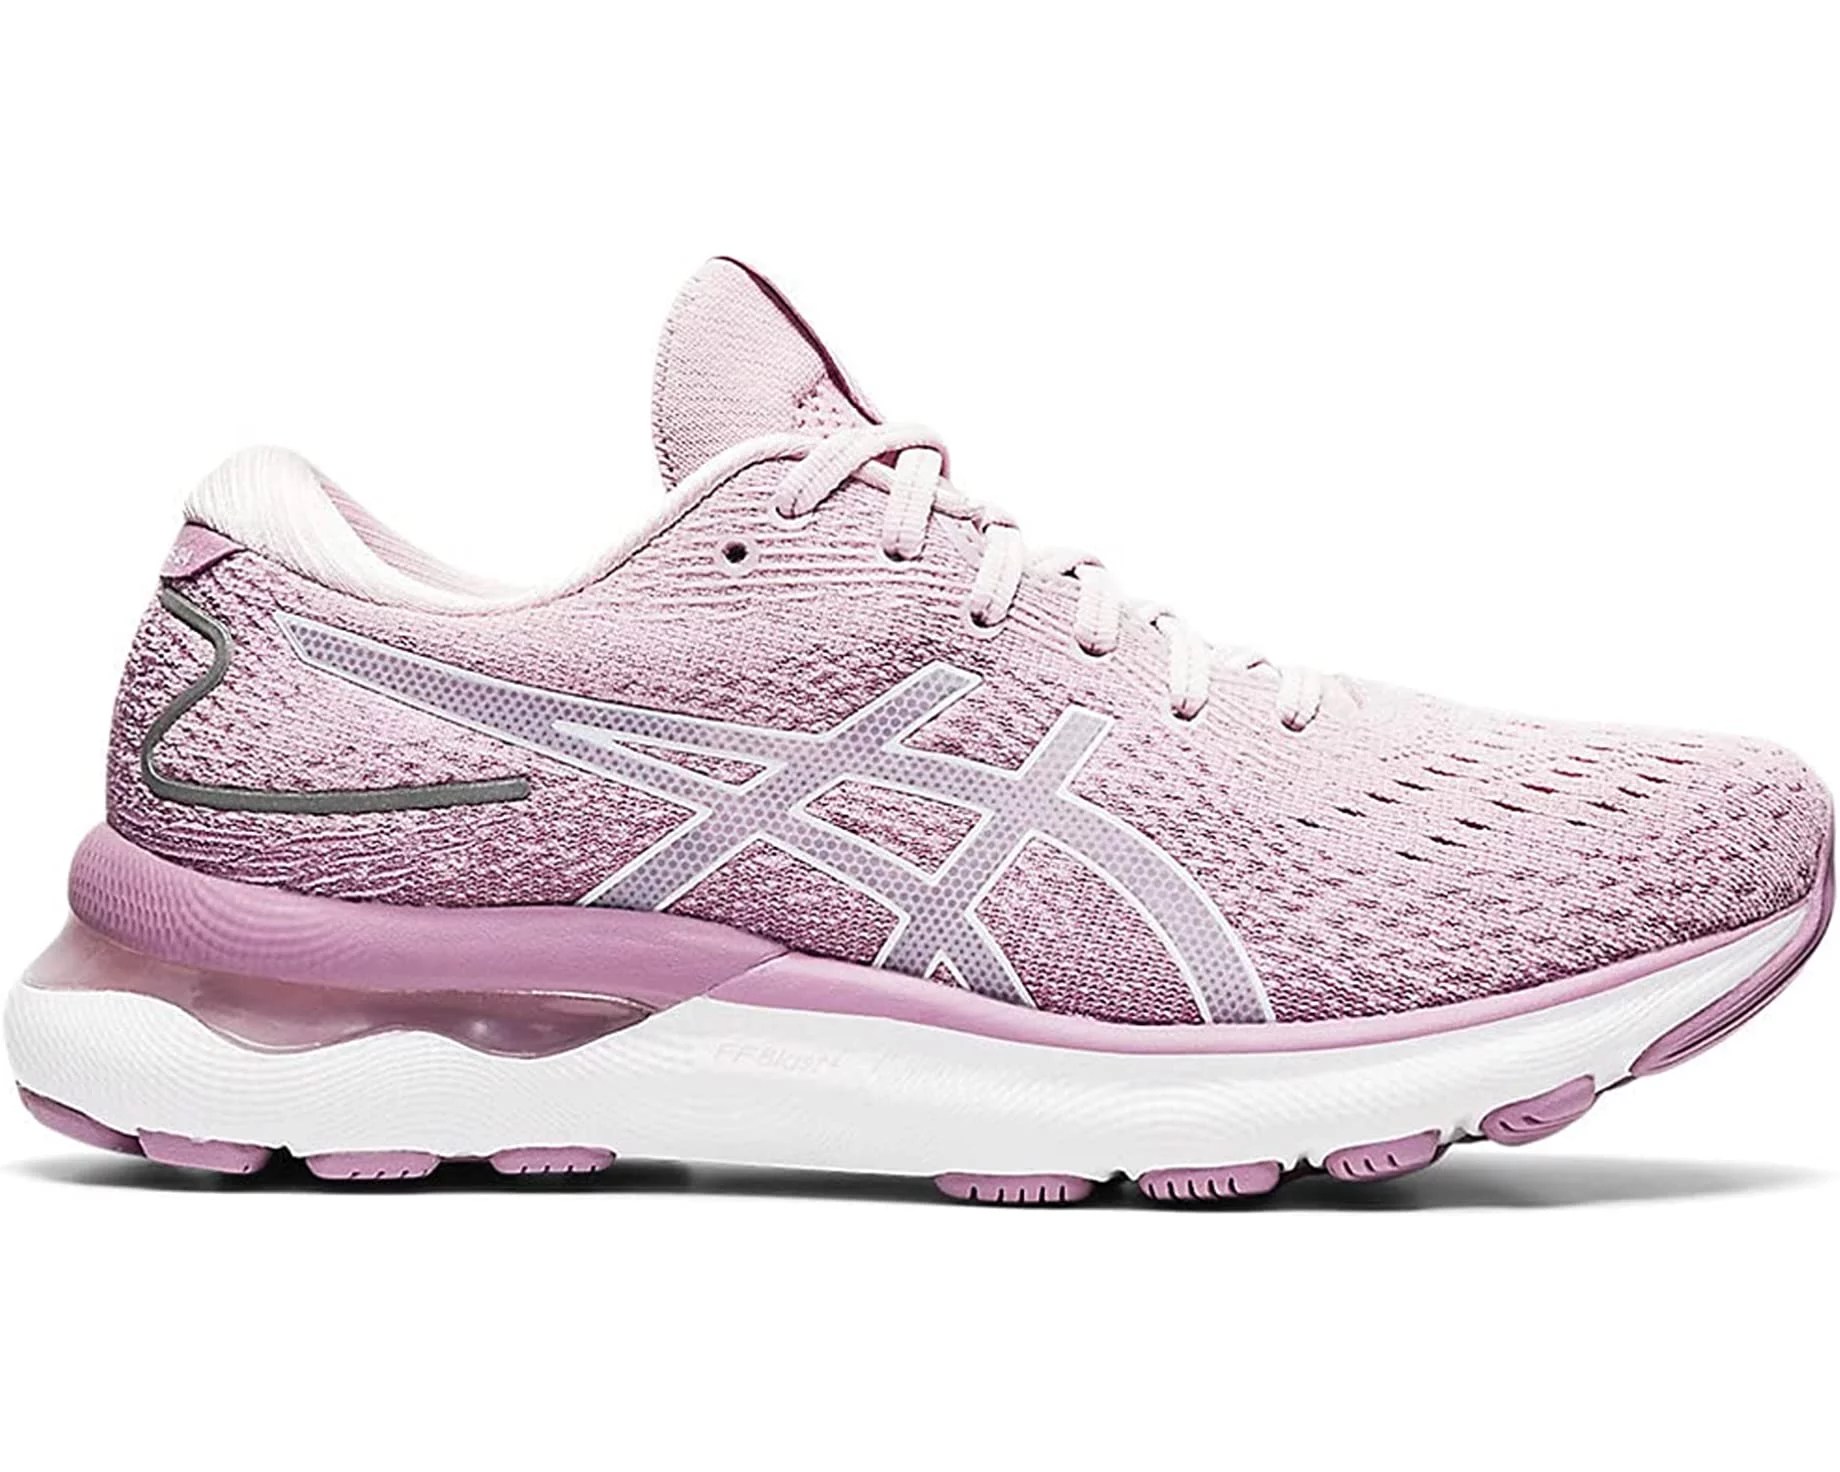 An all-pink sneaker with a white sole from Asics